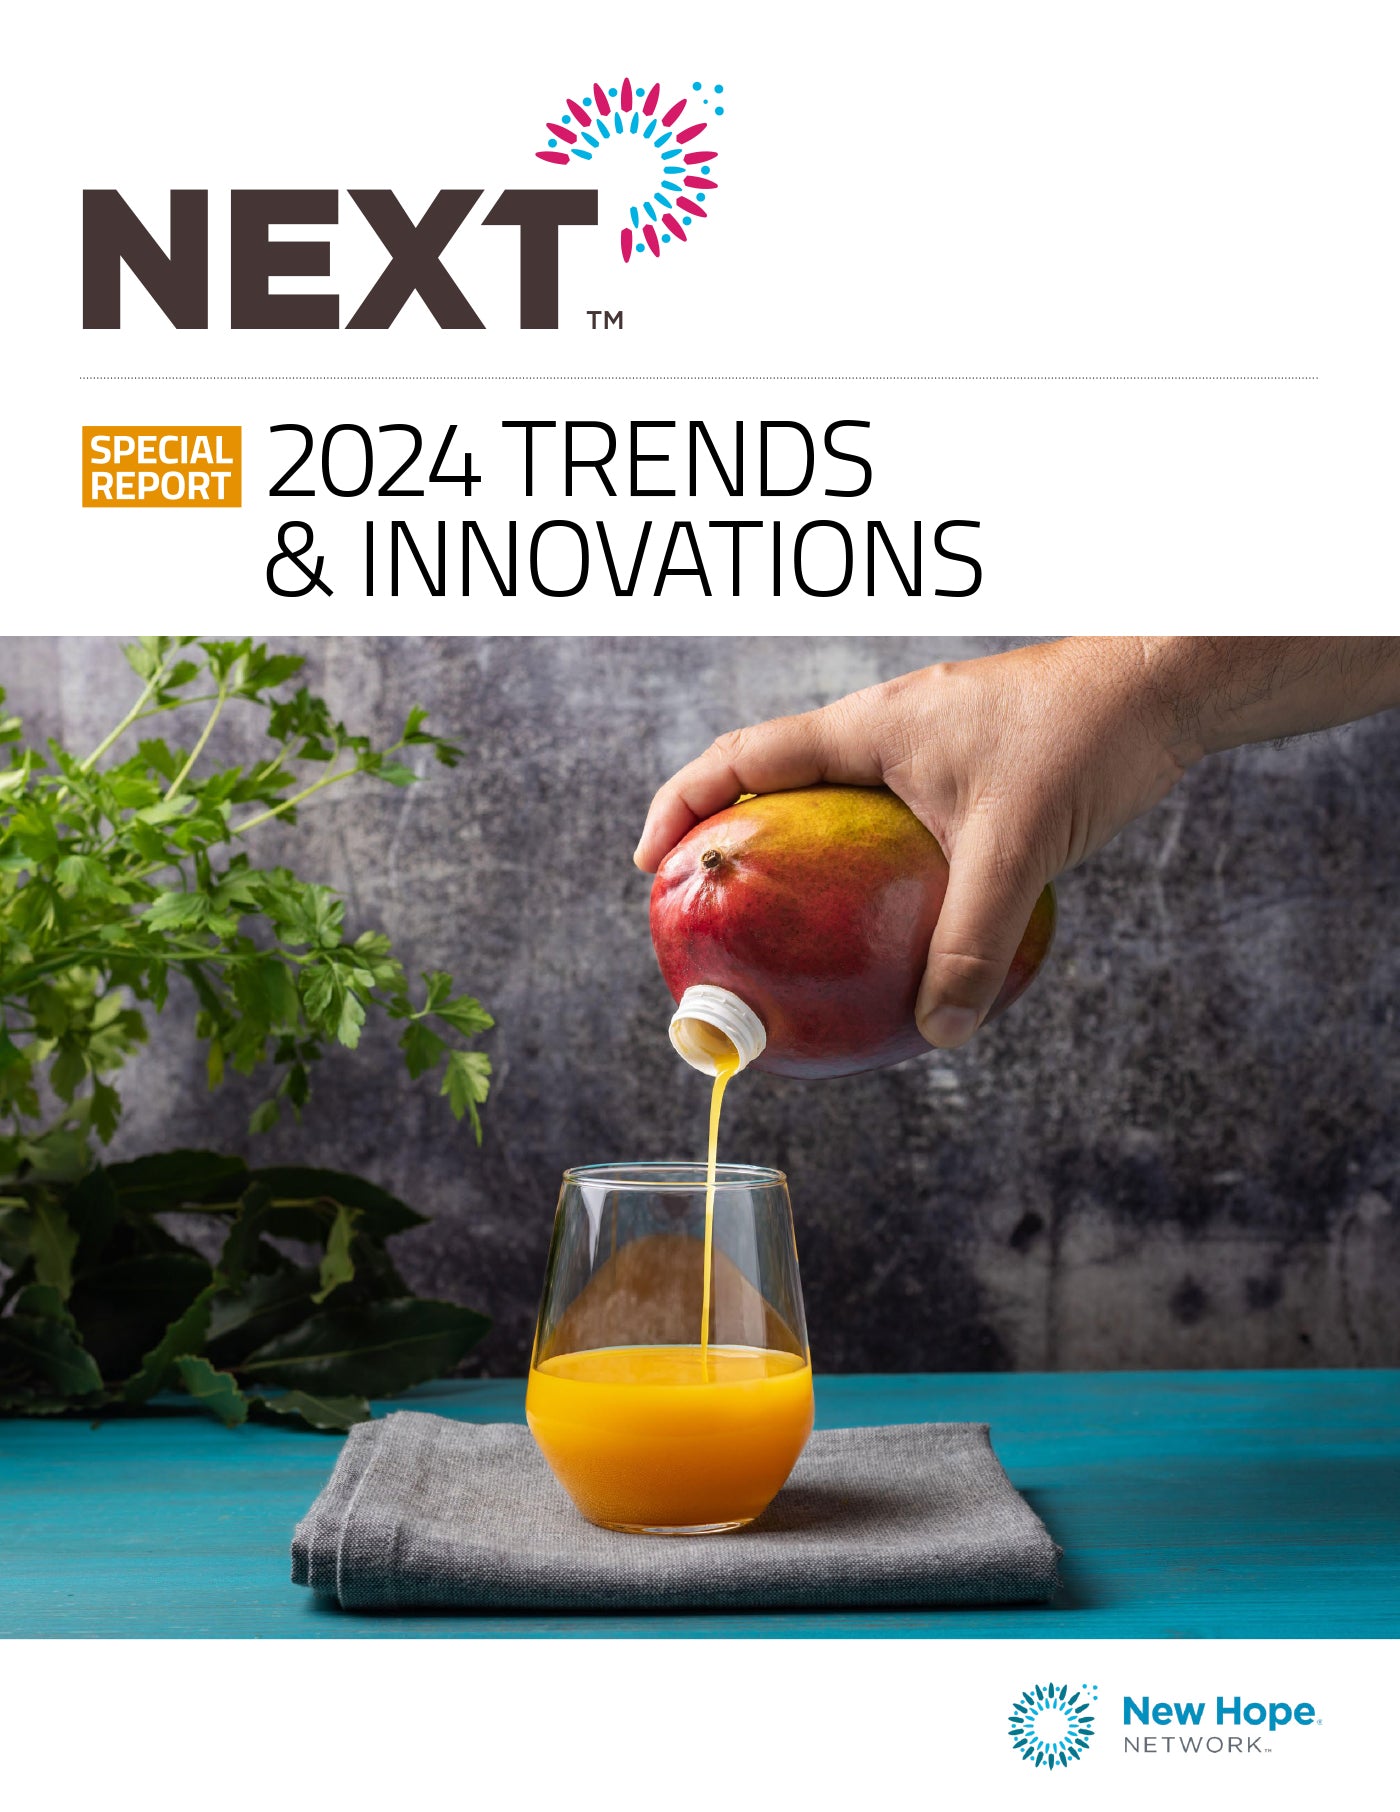 Trends & Innovations Report 2024 NEXT